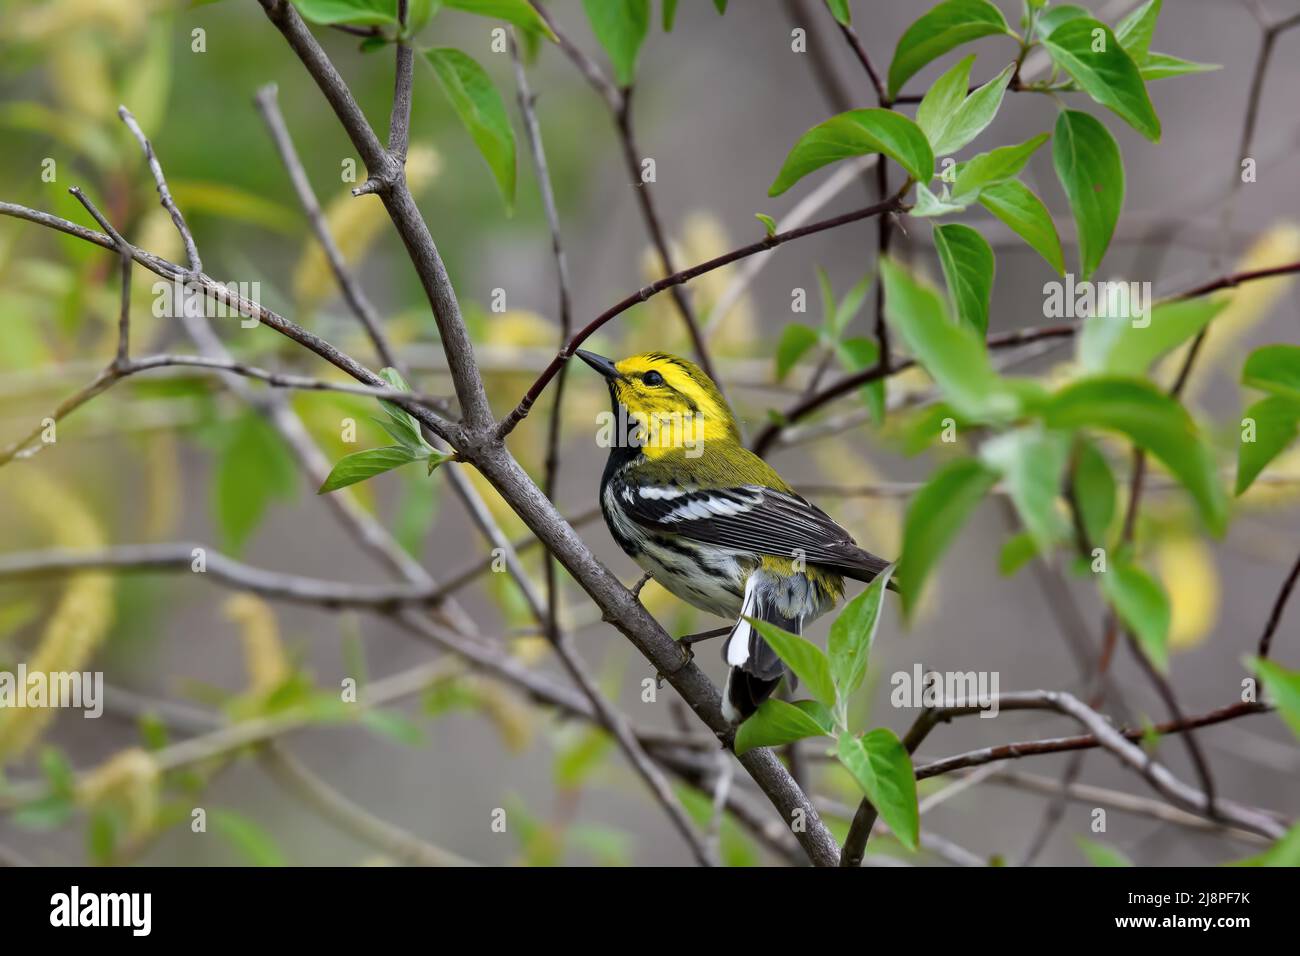 Black-throated Green Warbler or Setophaga virens in woods on a cloudy spring day during migration. Stock Photo